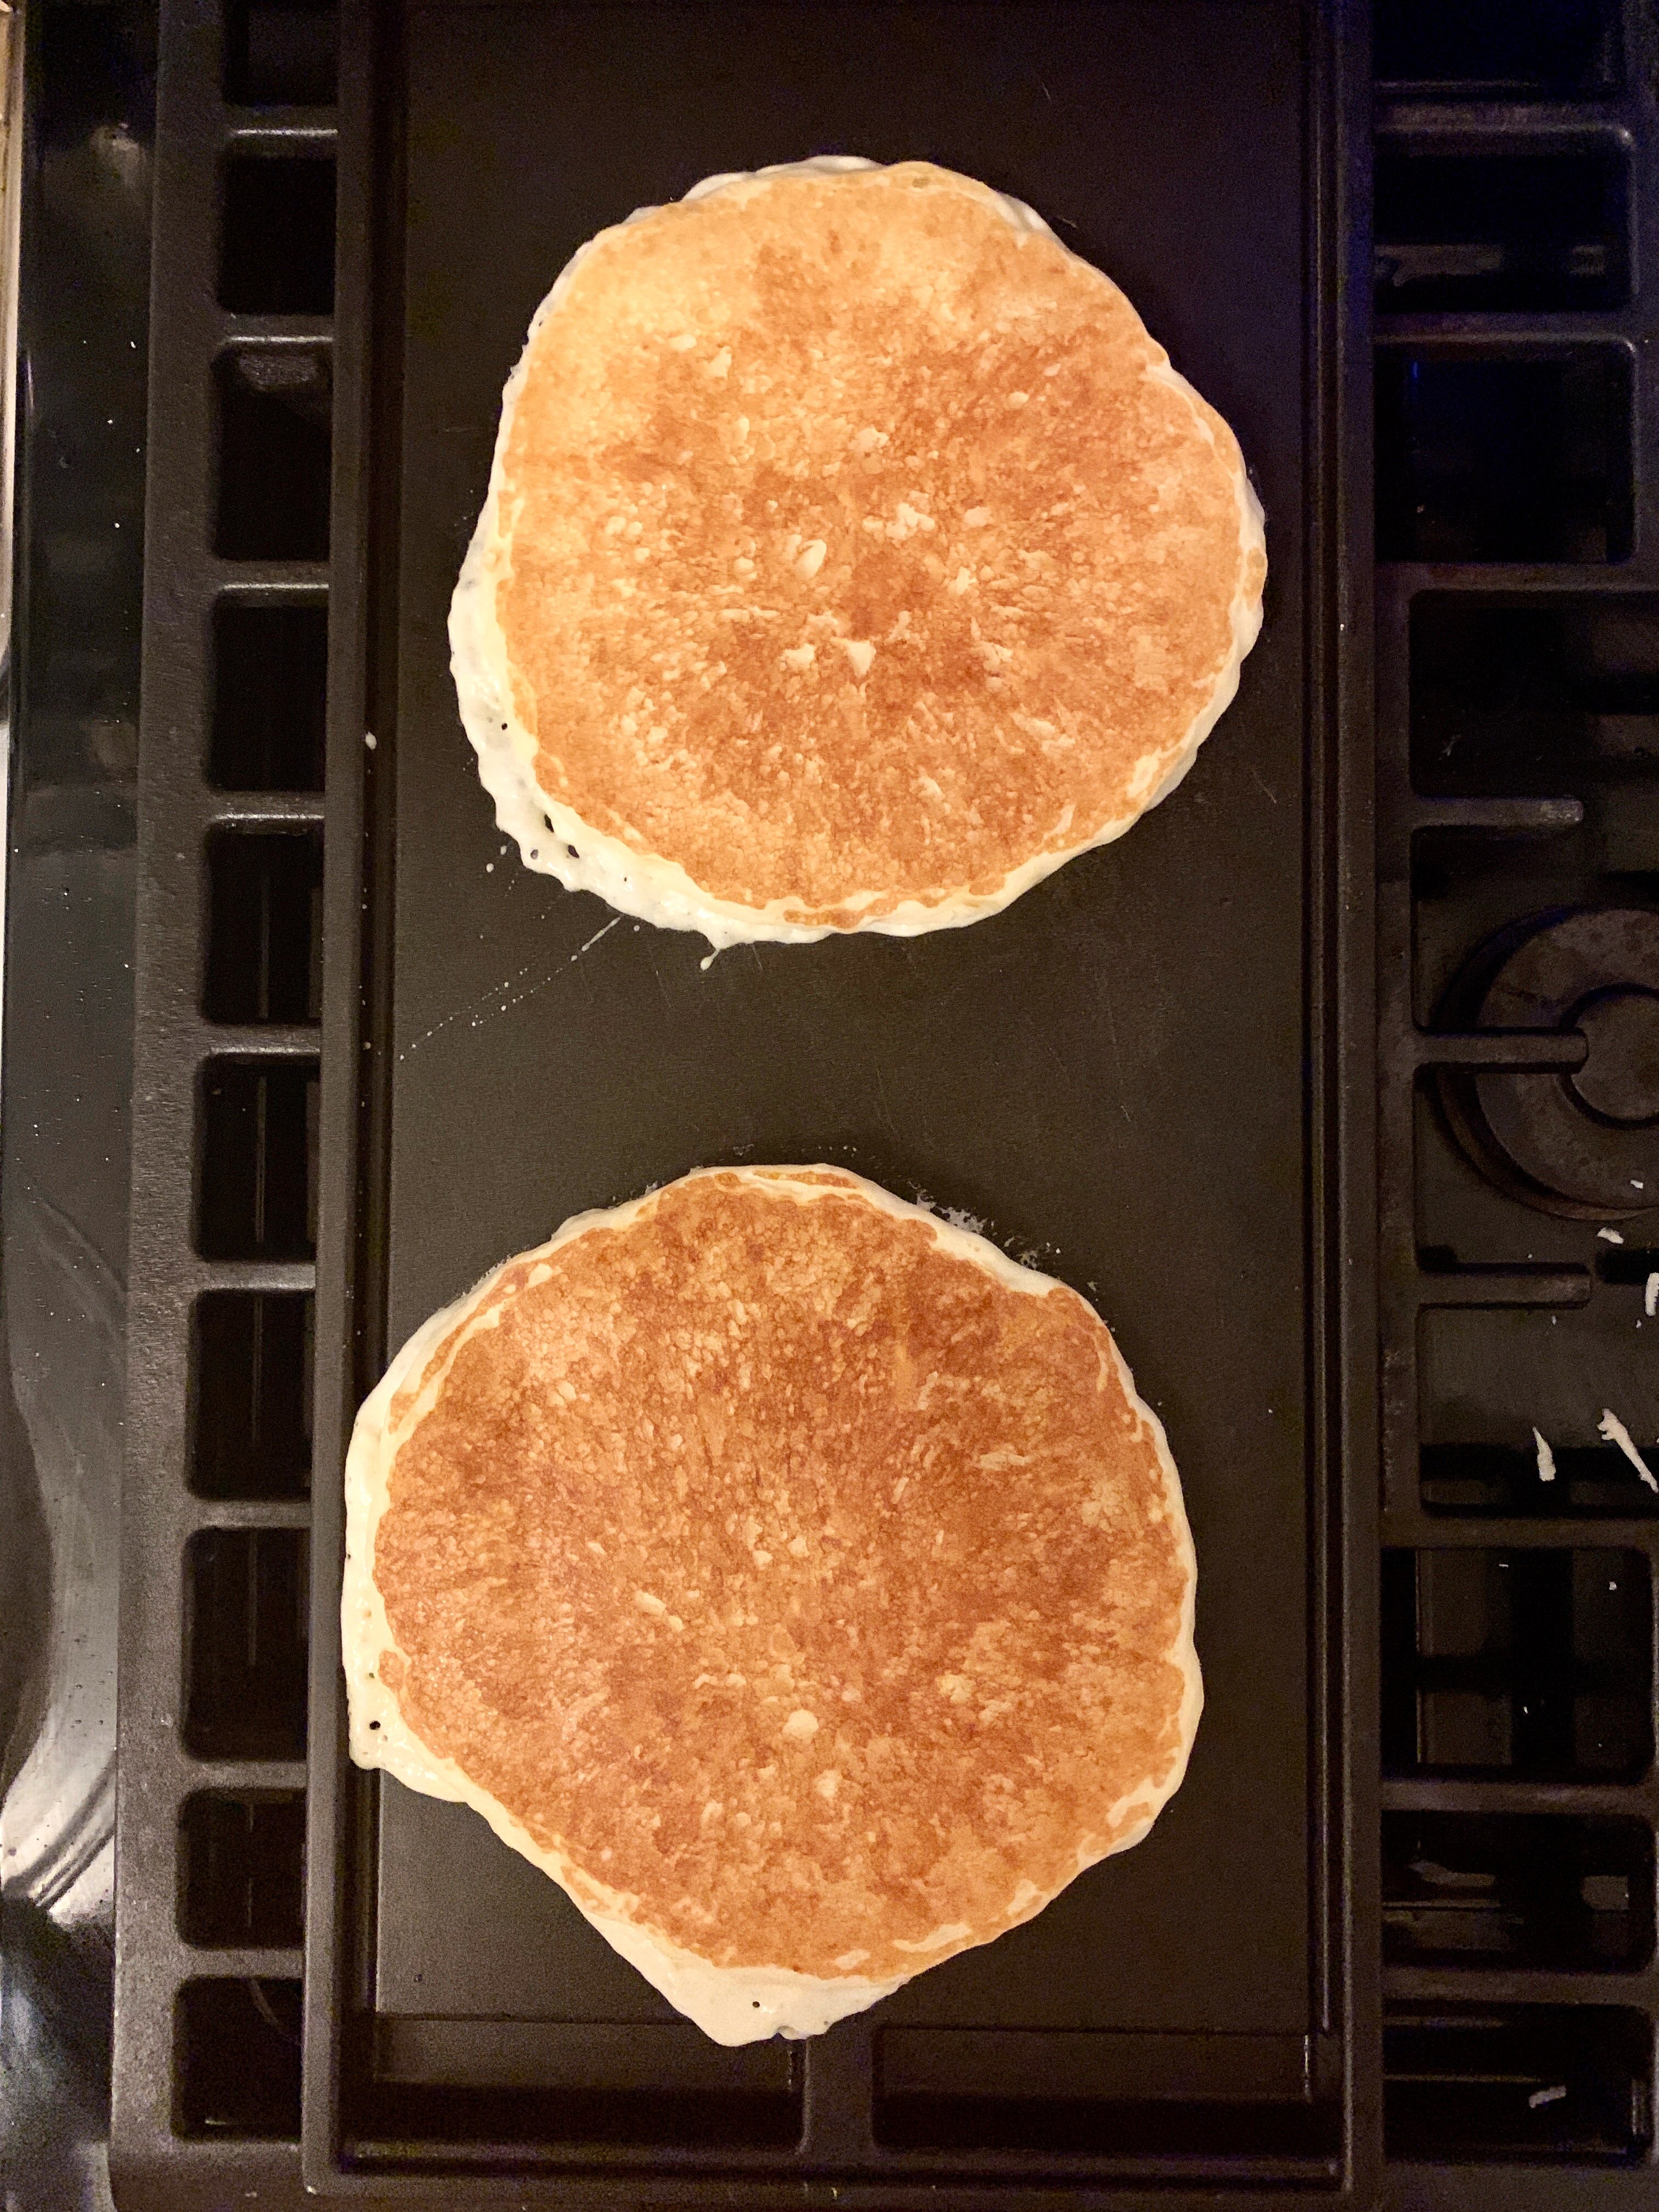 How to make pancakes in a cast iron skillet